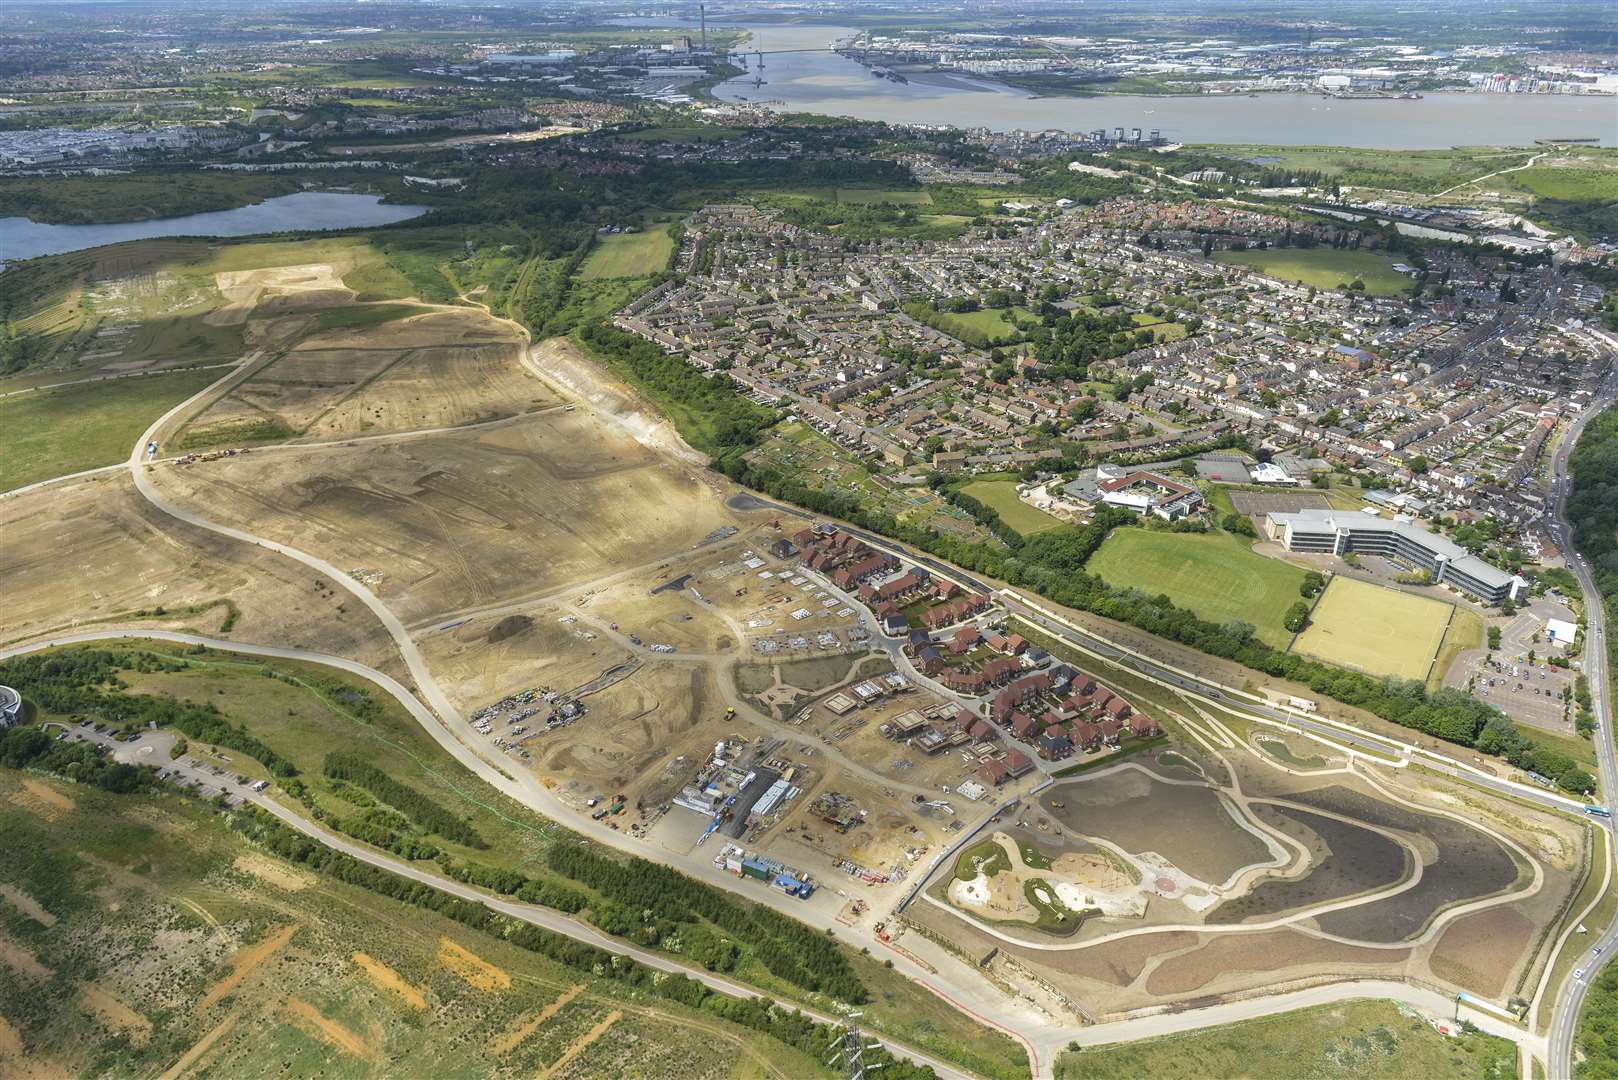 The Eastern Quarry at Ebbsfleet Garden City where the school will be built